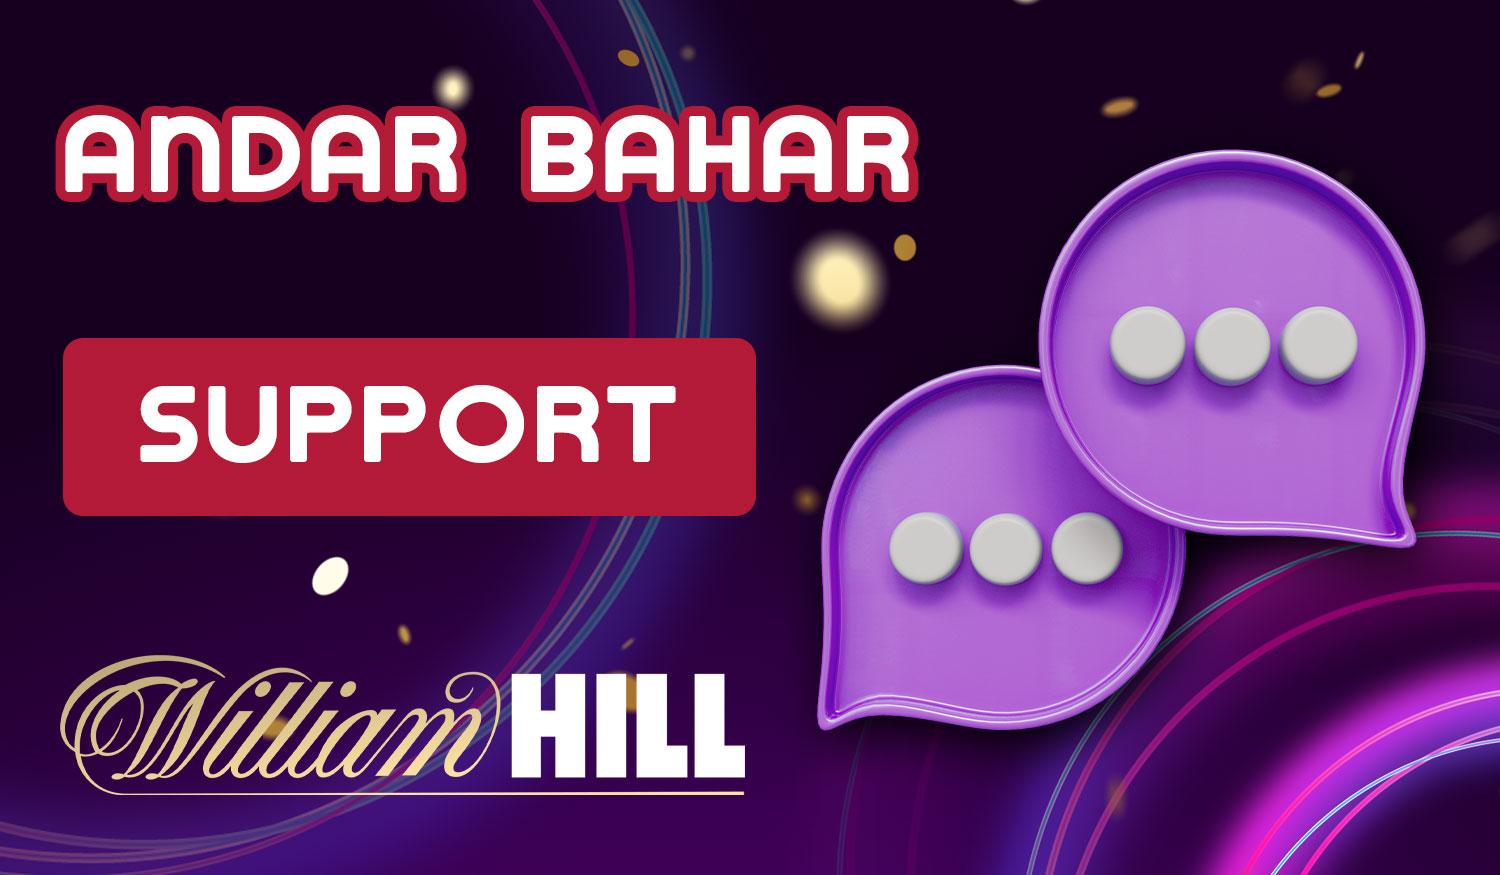 William Hill provides full 24/7 support for players from India